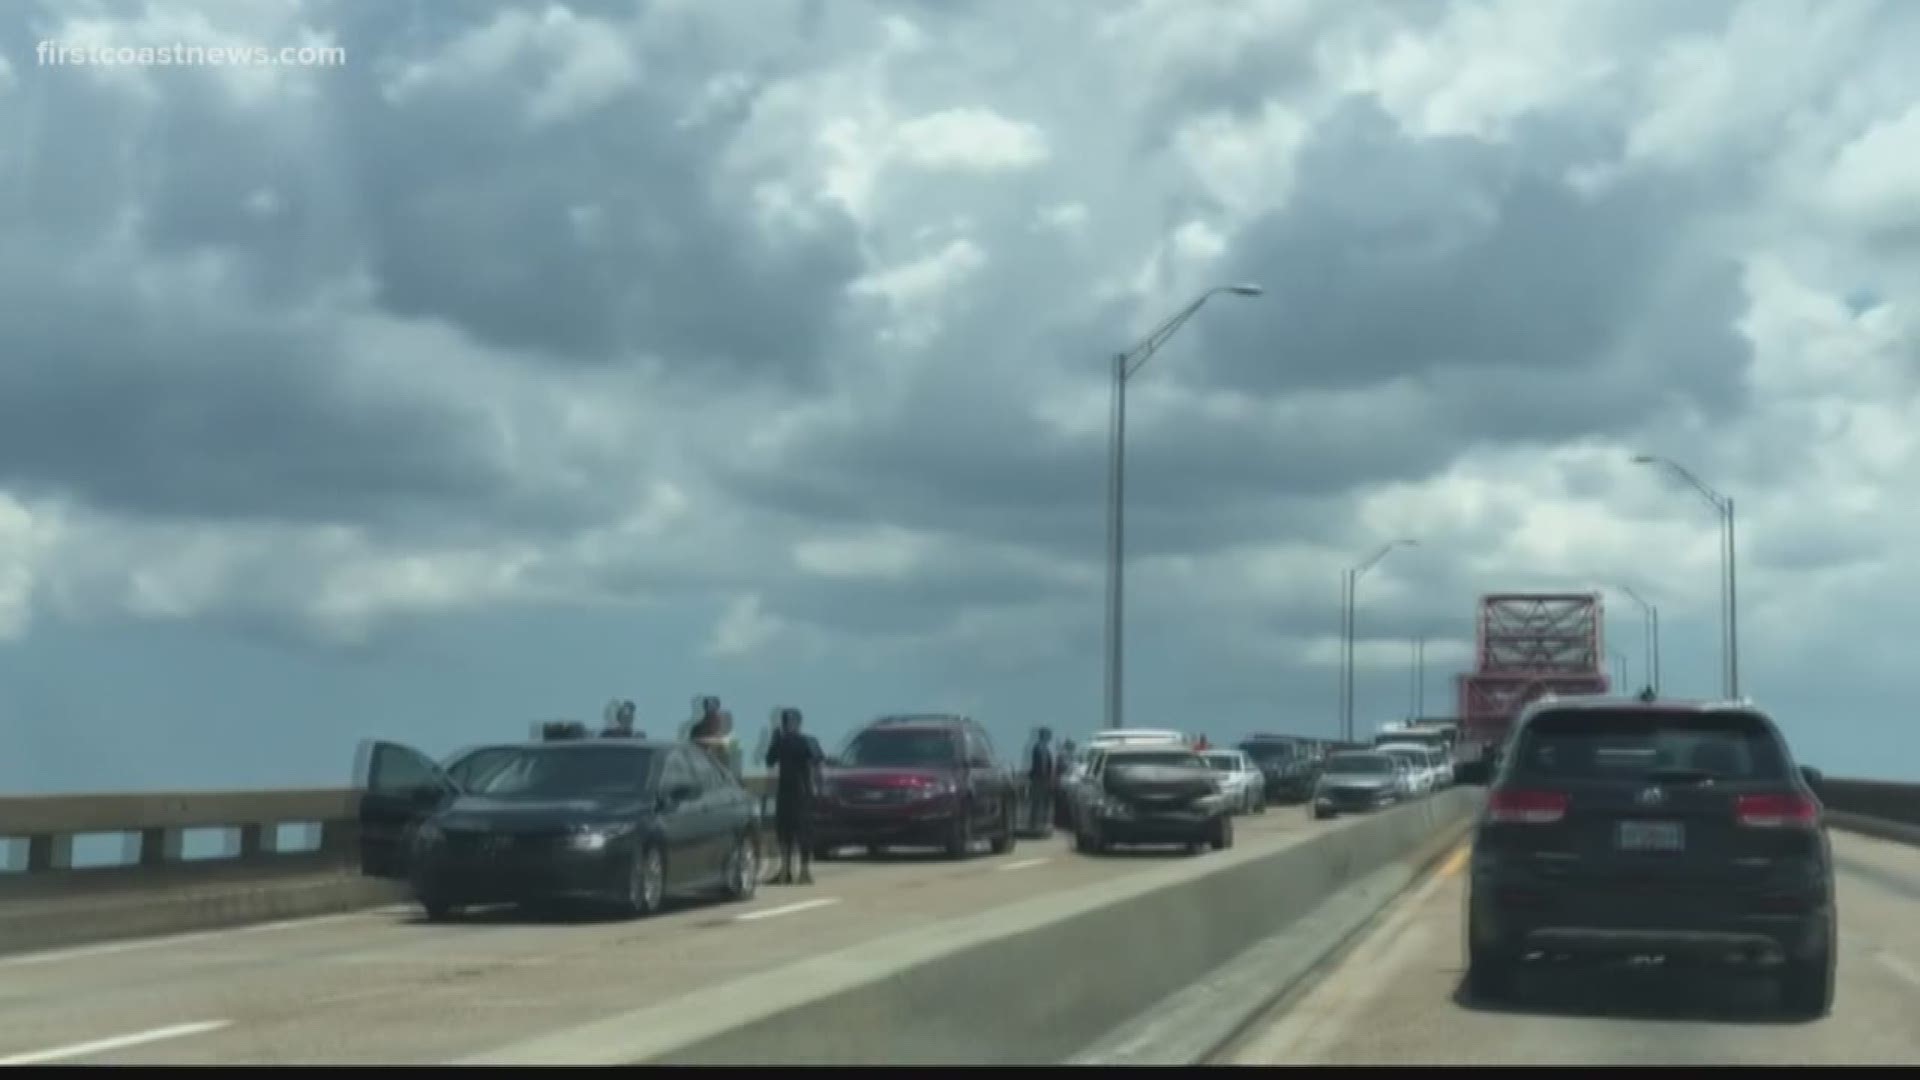 Multiple injuries have been reported after an estimated five cars collided on the Mathews Bridge, according to the Jacksonville Fire and Rescue Department.